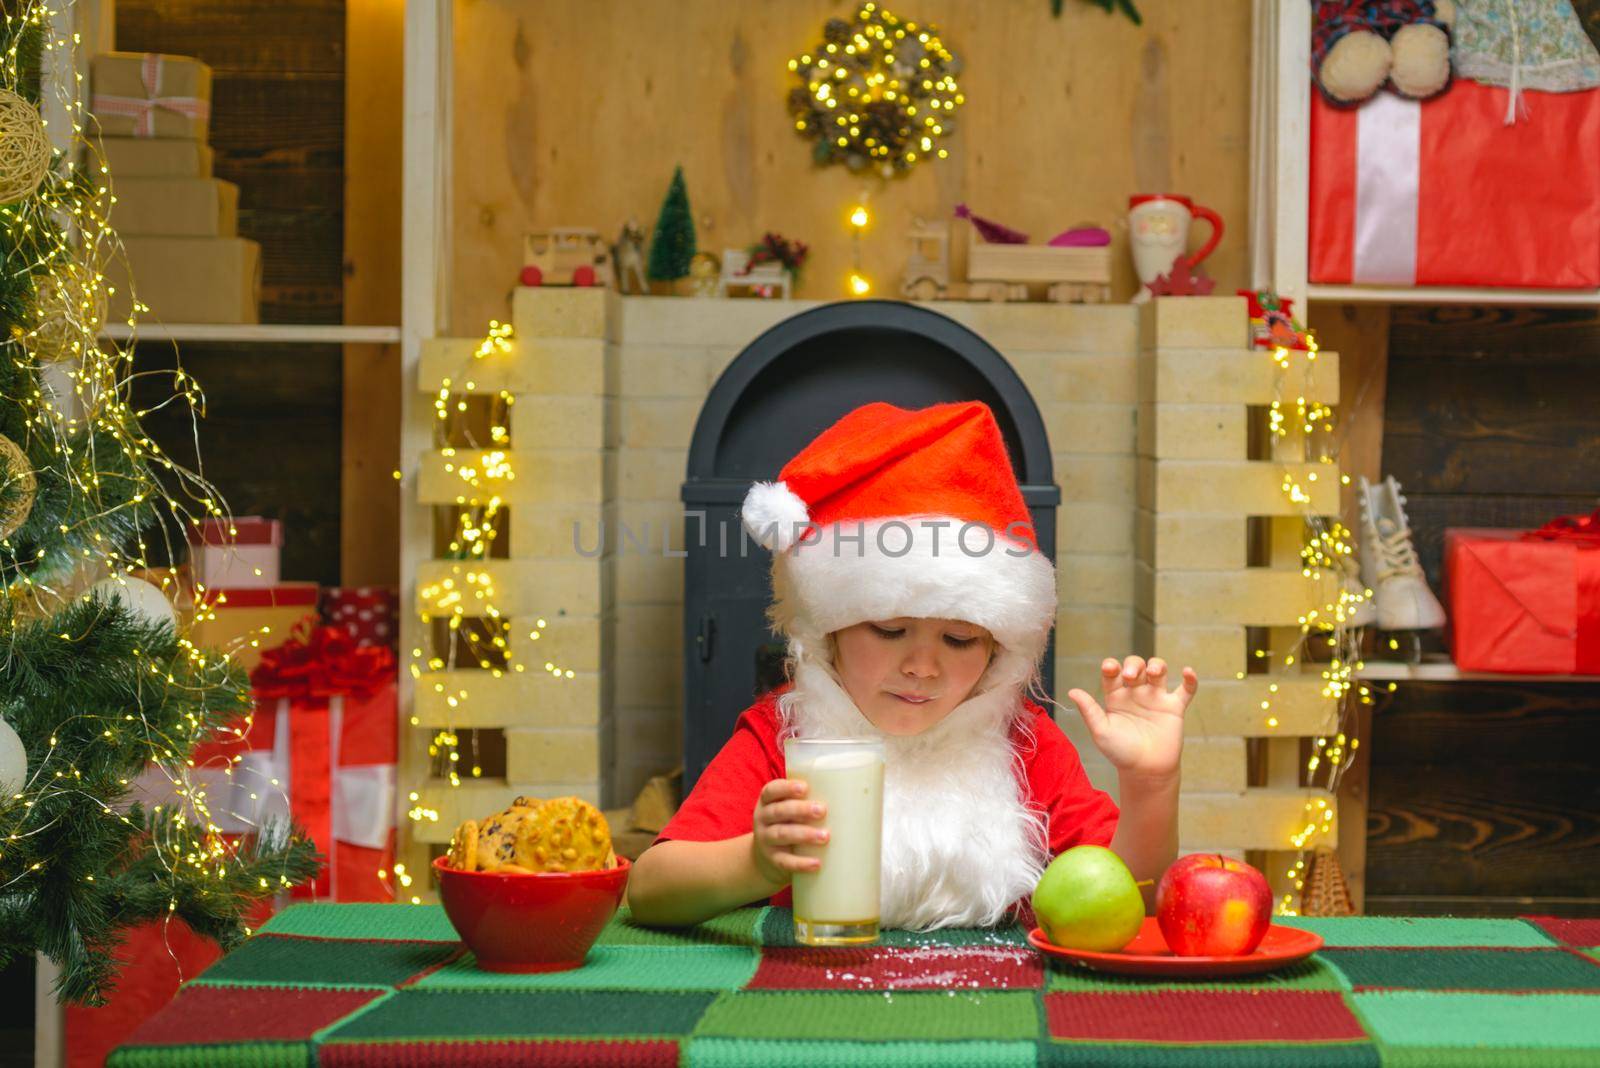 Portrait of Santa Claus Drinking milk from glass and holding cookies. Santa Claus takes a cookie on Christmas Eve as a thank you gift for leaving presents